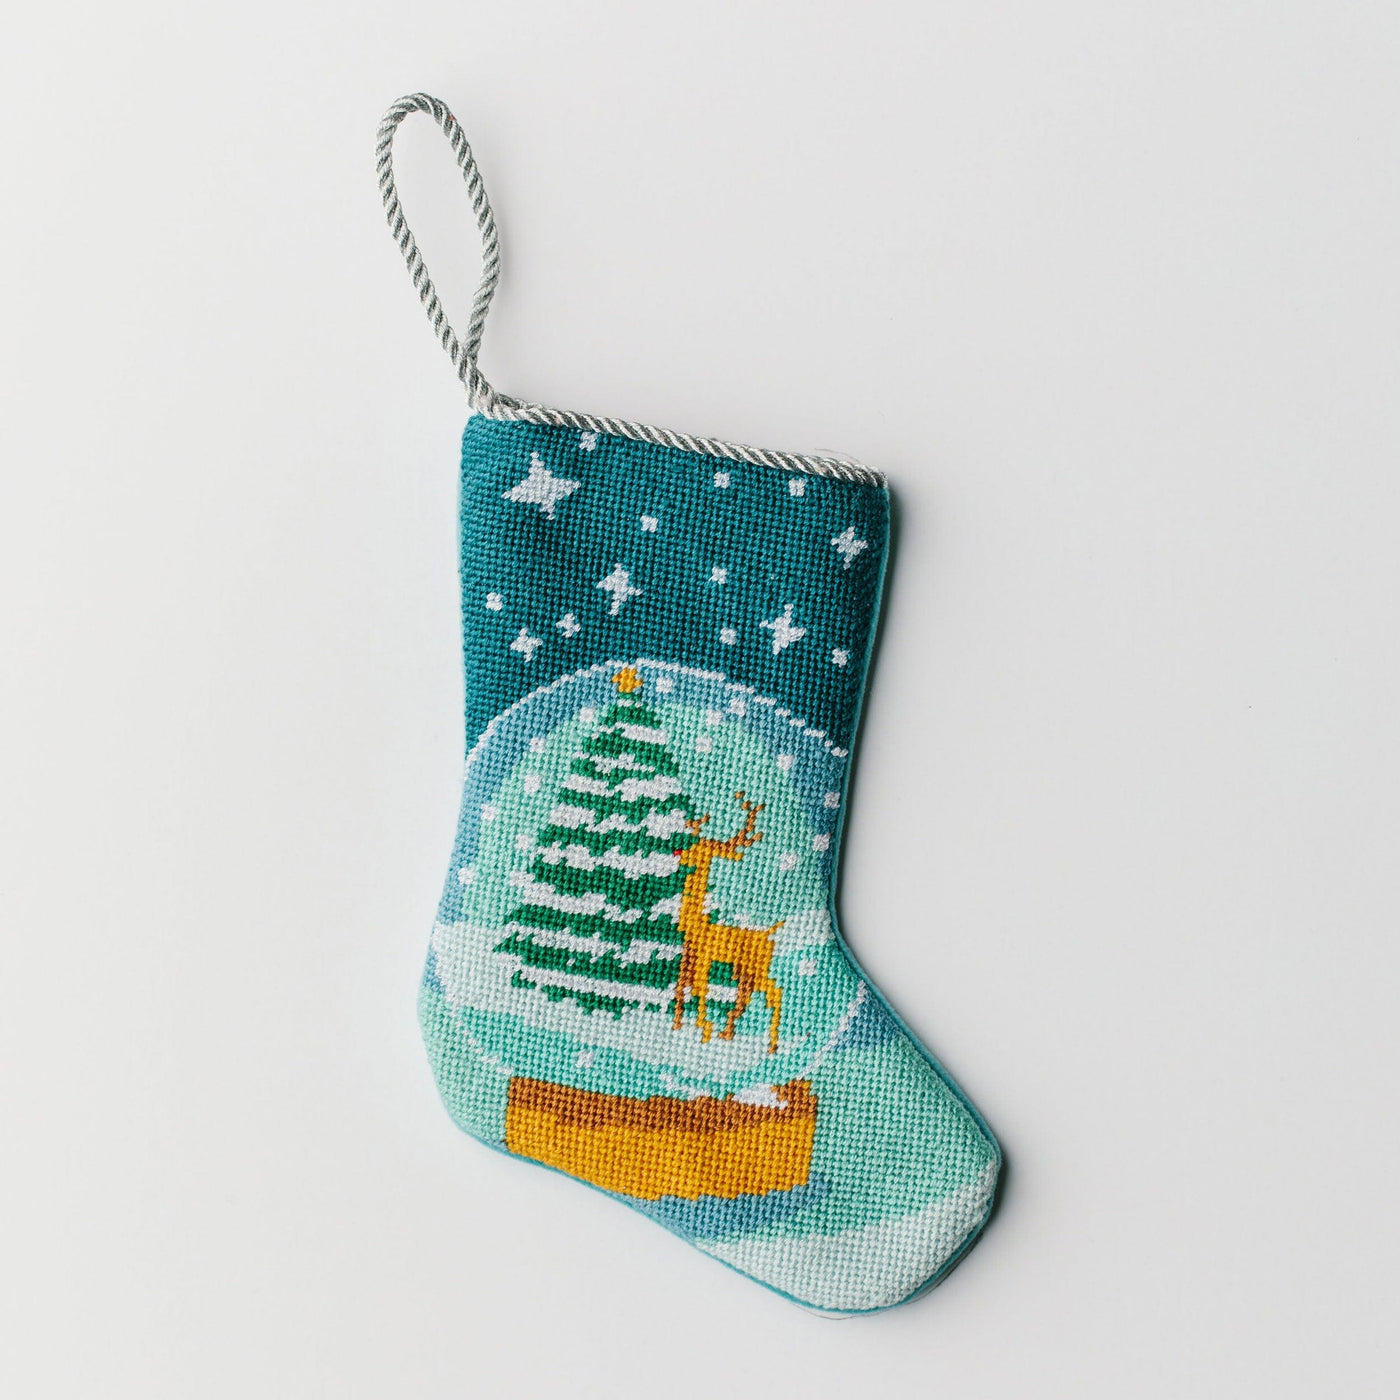 Let It Snow Stocking Holiday Stockings Bauble Stockings 